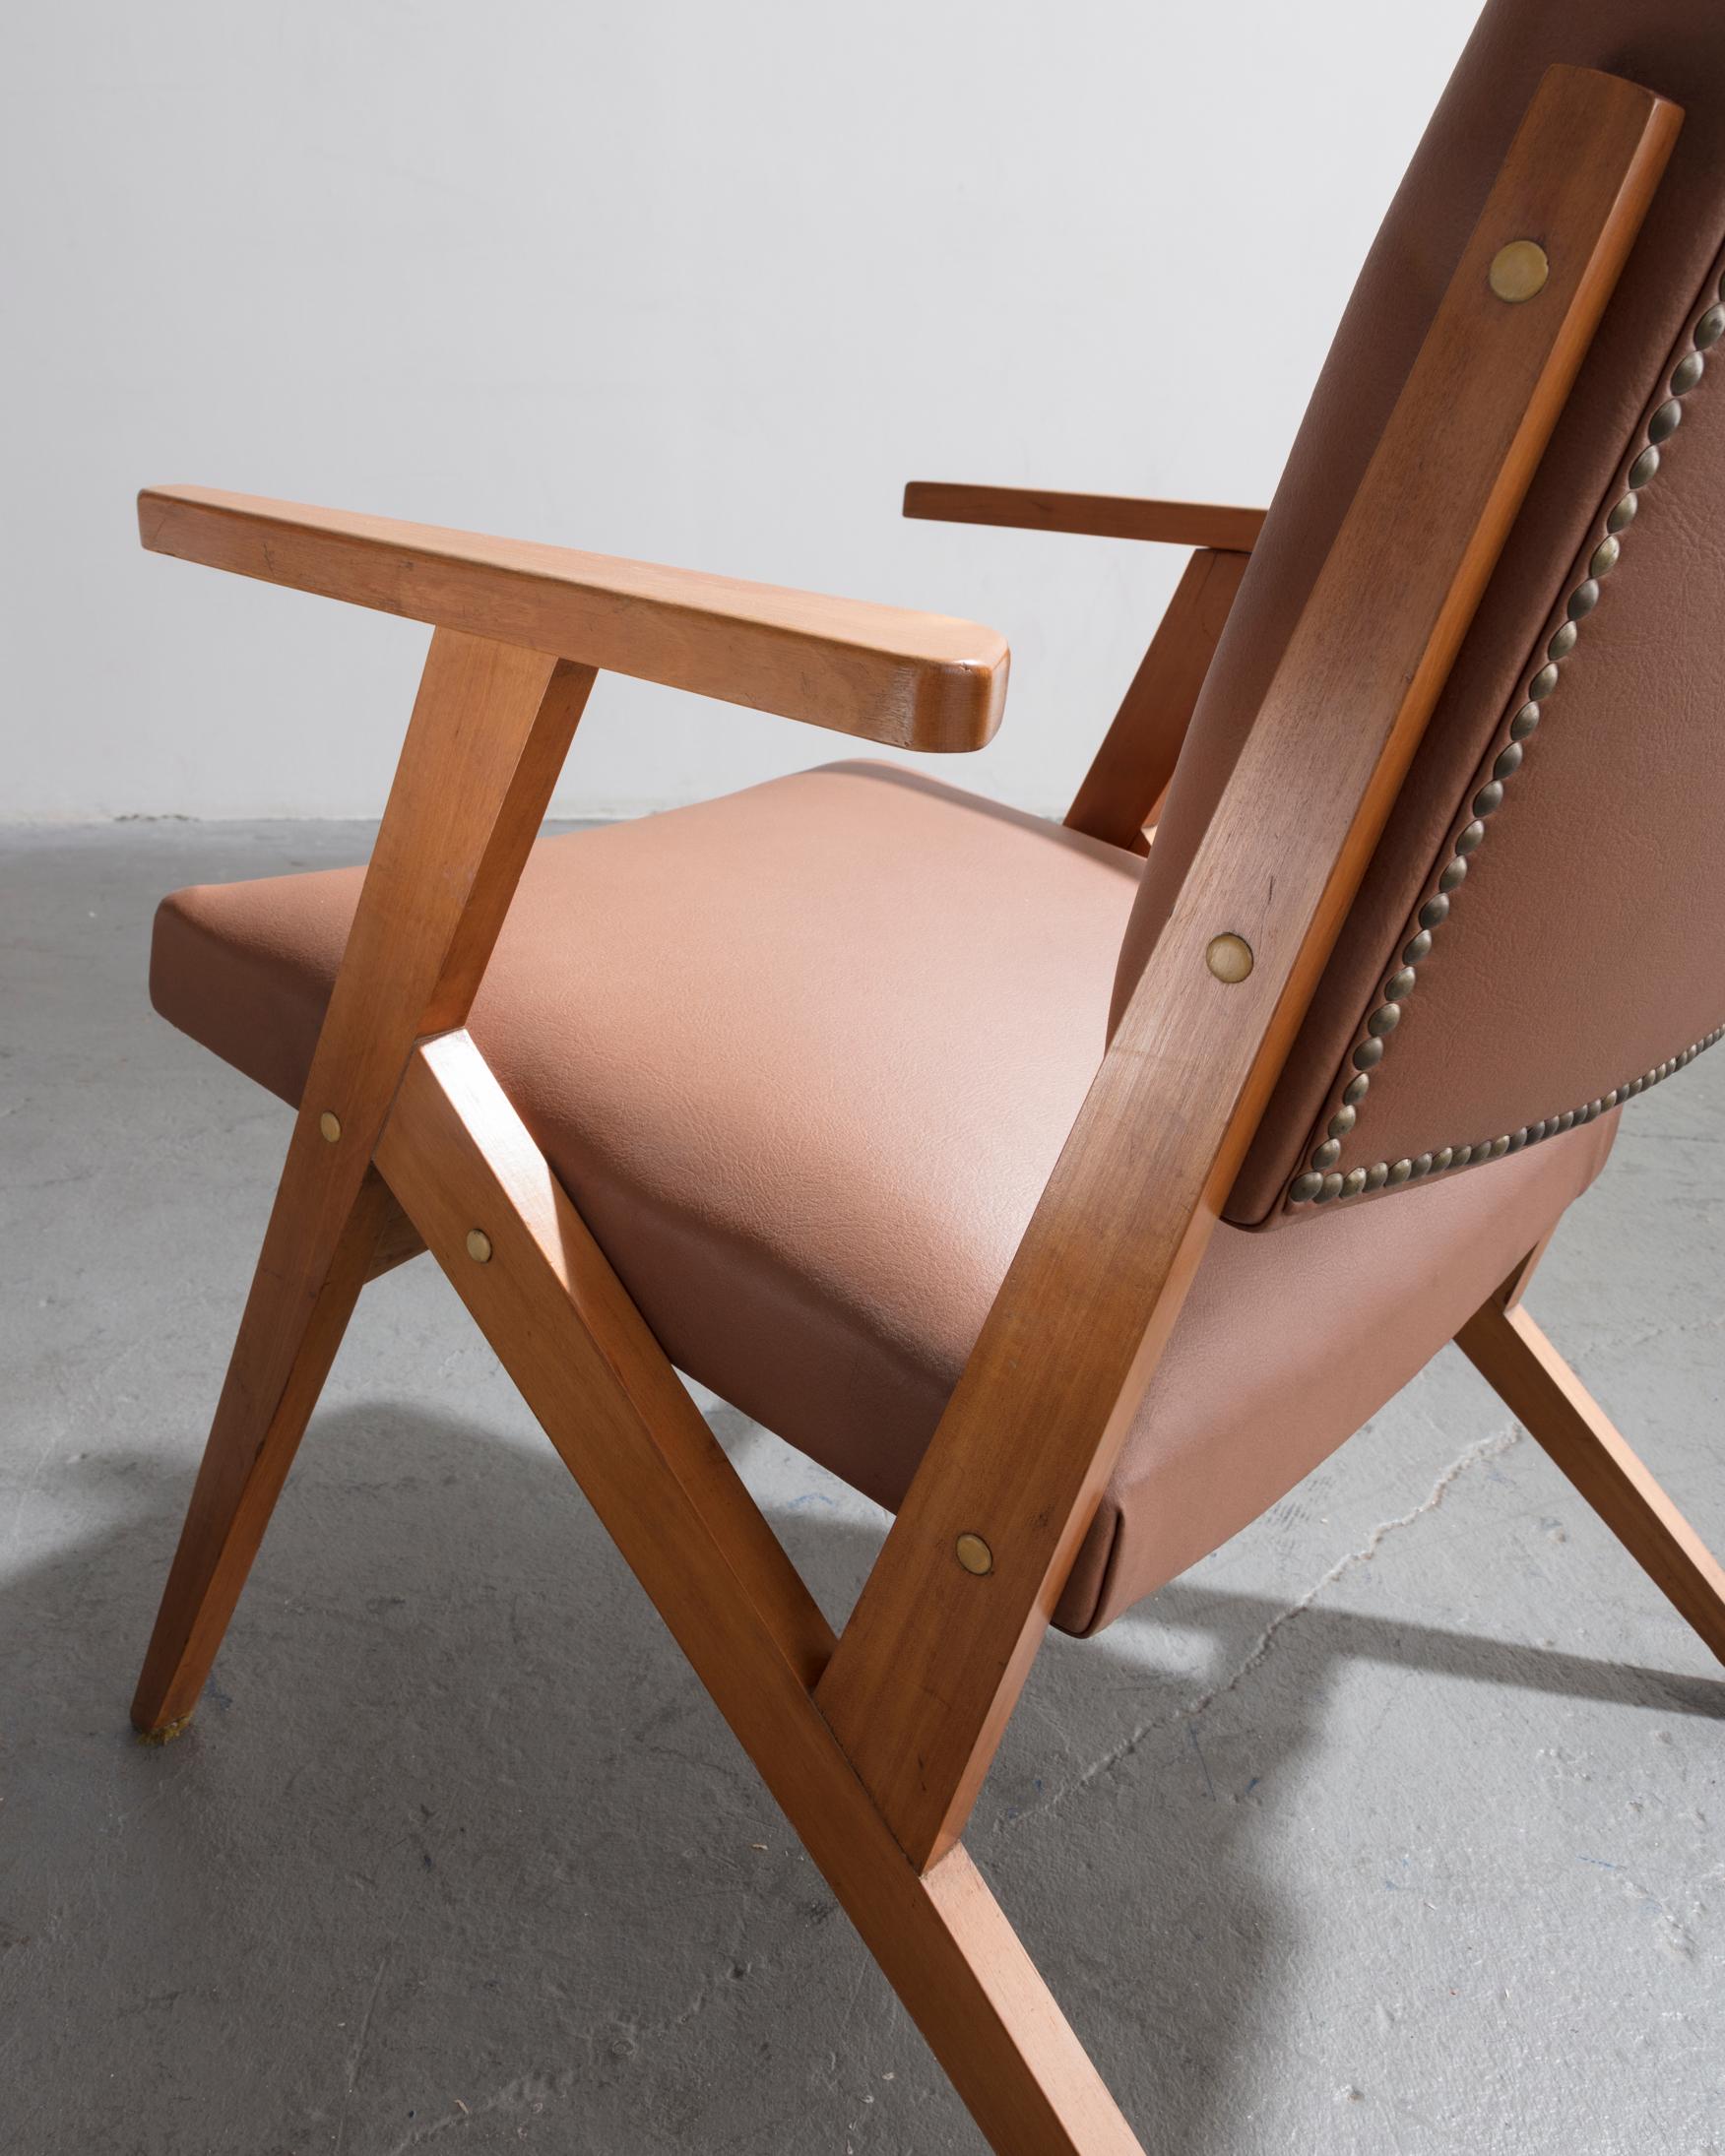 Mid-20th Century Lounge Chair in Caviona Wood and Tan Leather by José Zanine Caldas, 1960s For Sale